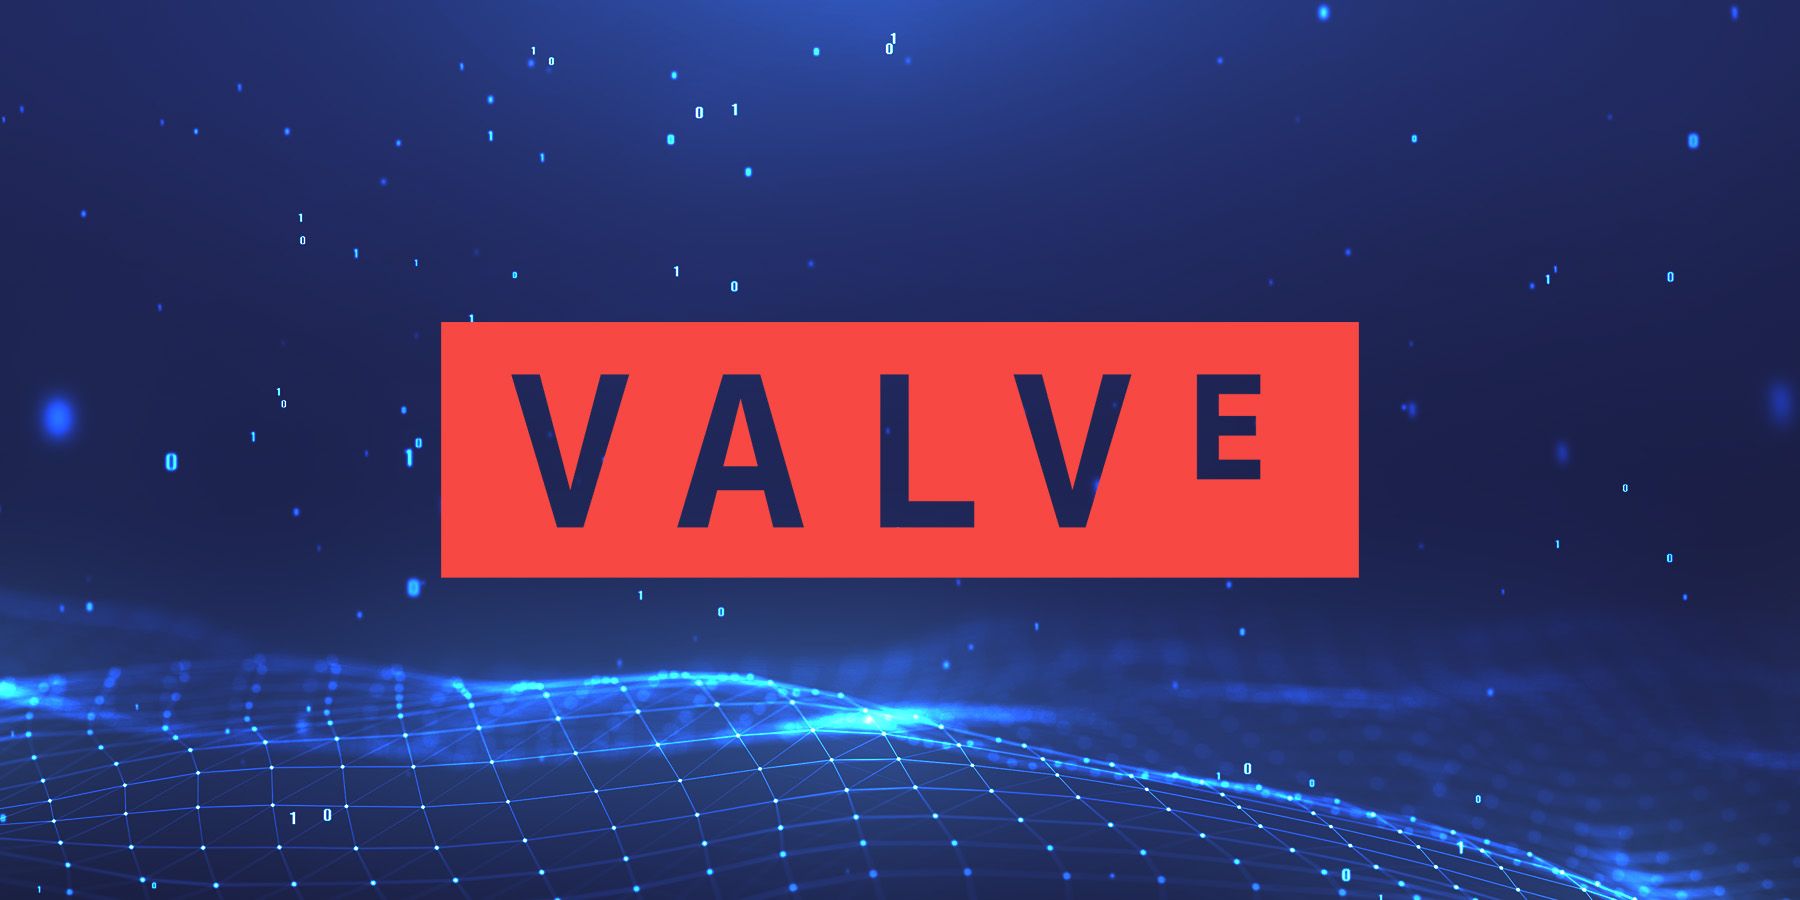 Valve bans the use of AI in Steam games - - Gamereactor